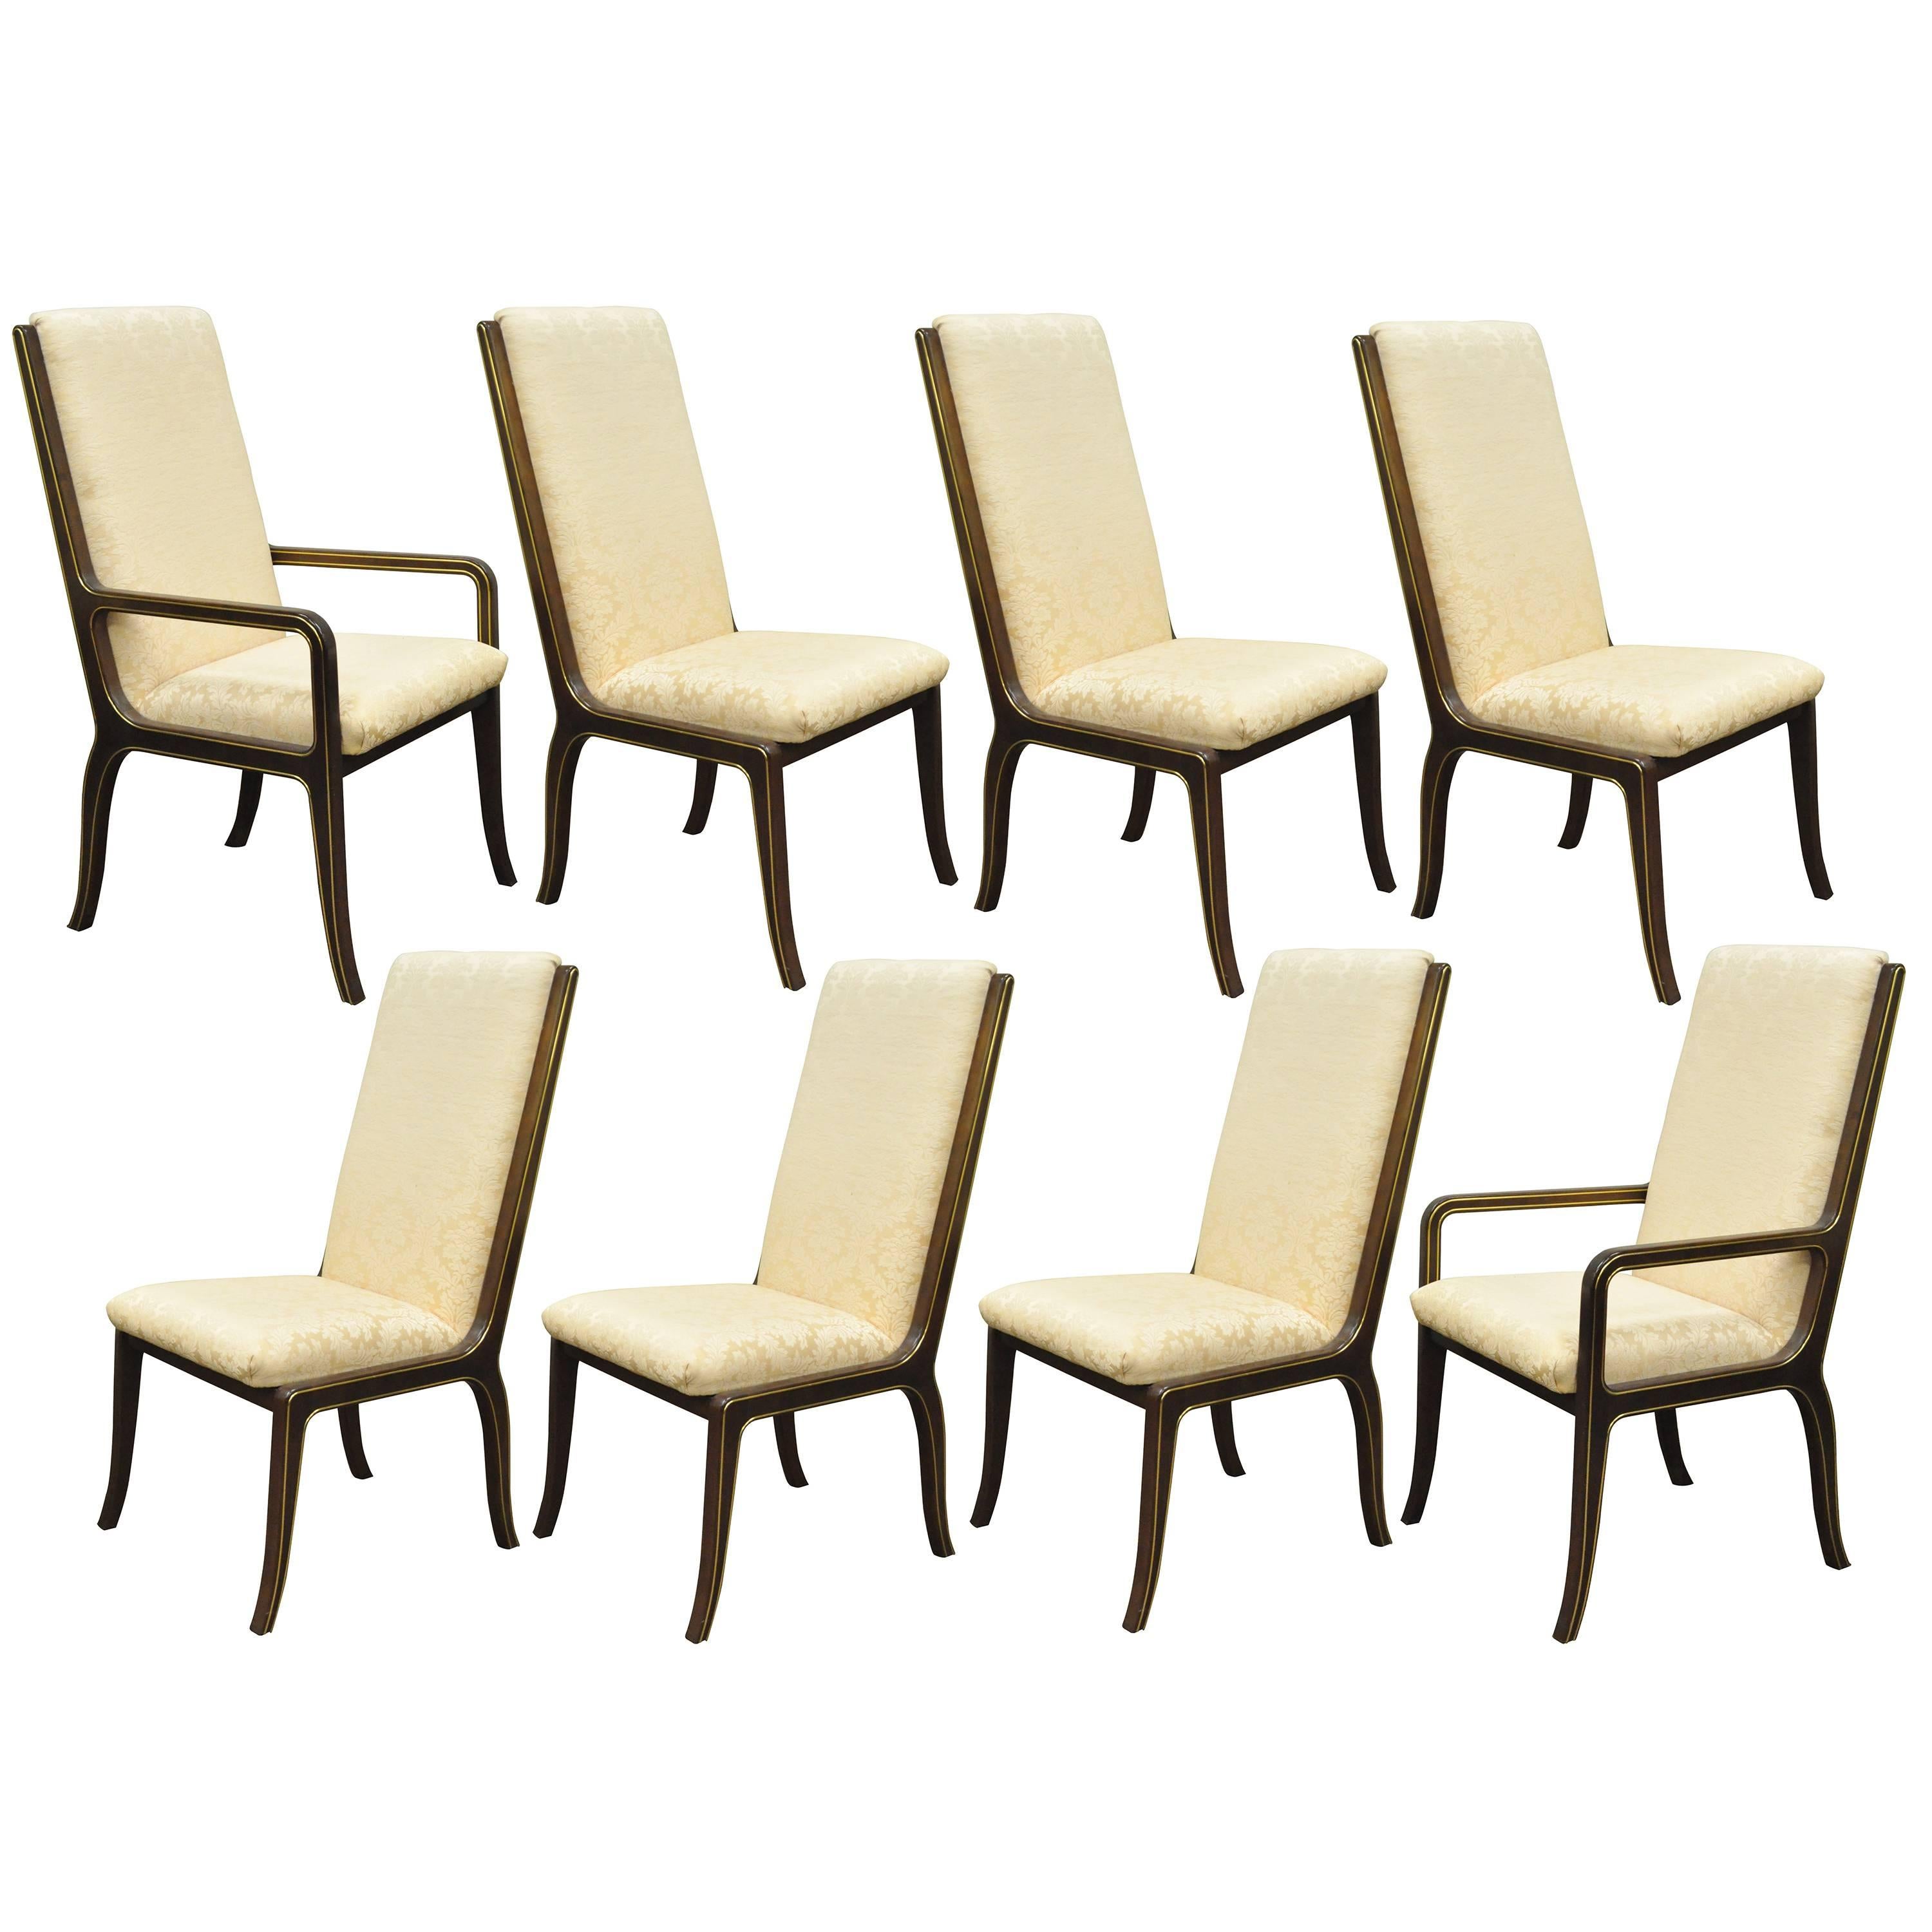 Set of Eight Mastercraft for Baker Brass Trim Dining Room Chairs